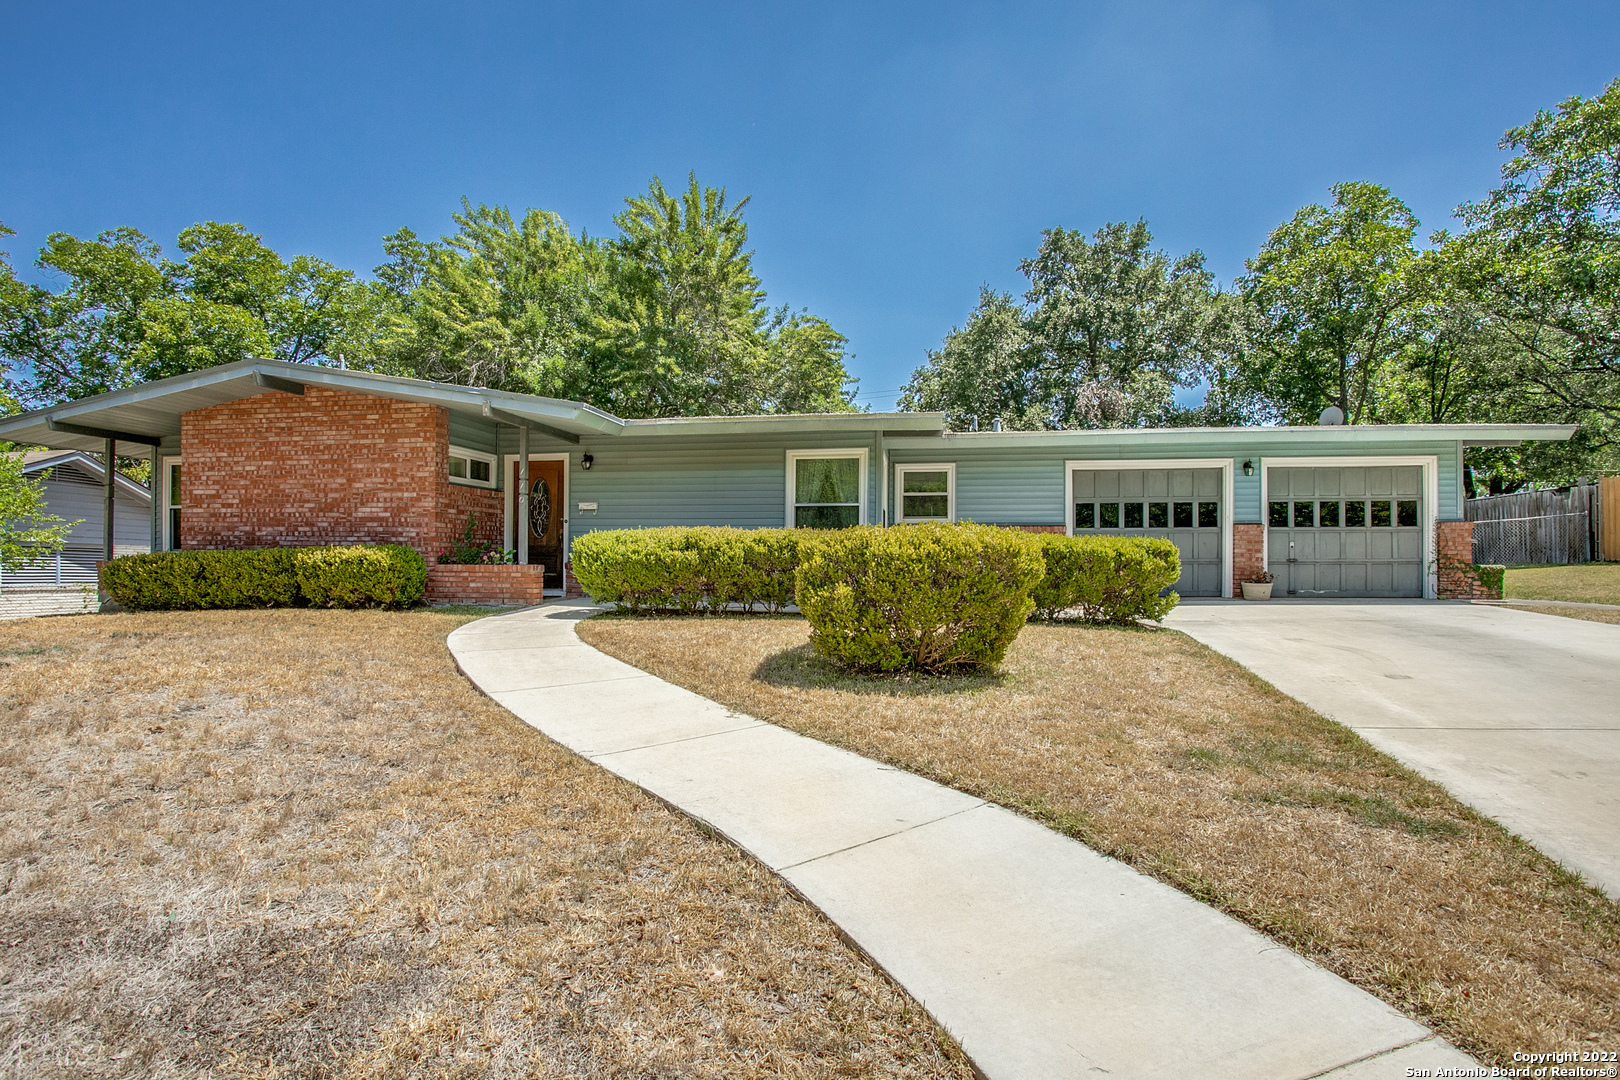 First time this terrific home has been on the market since 1955! 1900 Sq ft 3/2 on BCAD, and an additional room, bathroom and dining Room providing an extra several hundred Square Feet (Verify measurements) ready for your Lovin! Can be lived in and/or an Investor Flip. This Location, Curb Appeal and the Lot have The WOW factor. The home has been loved and maintained through the years with an excellent floorplan, great use of space, and Charm that you will not get any place else. This is an Estate Sale with an Independent Executor, As-Is Sale